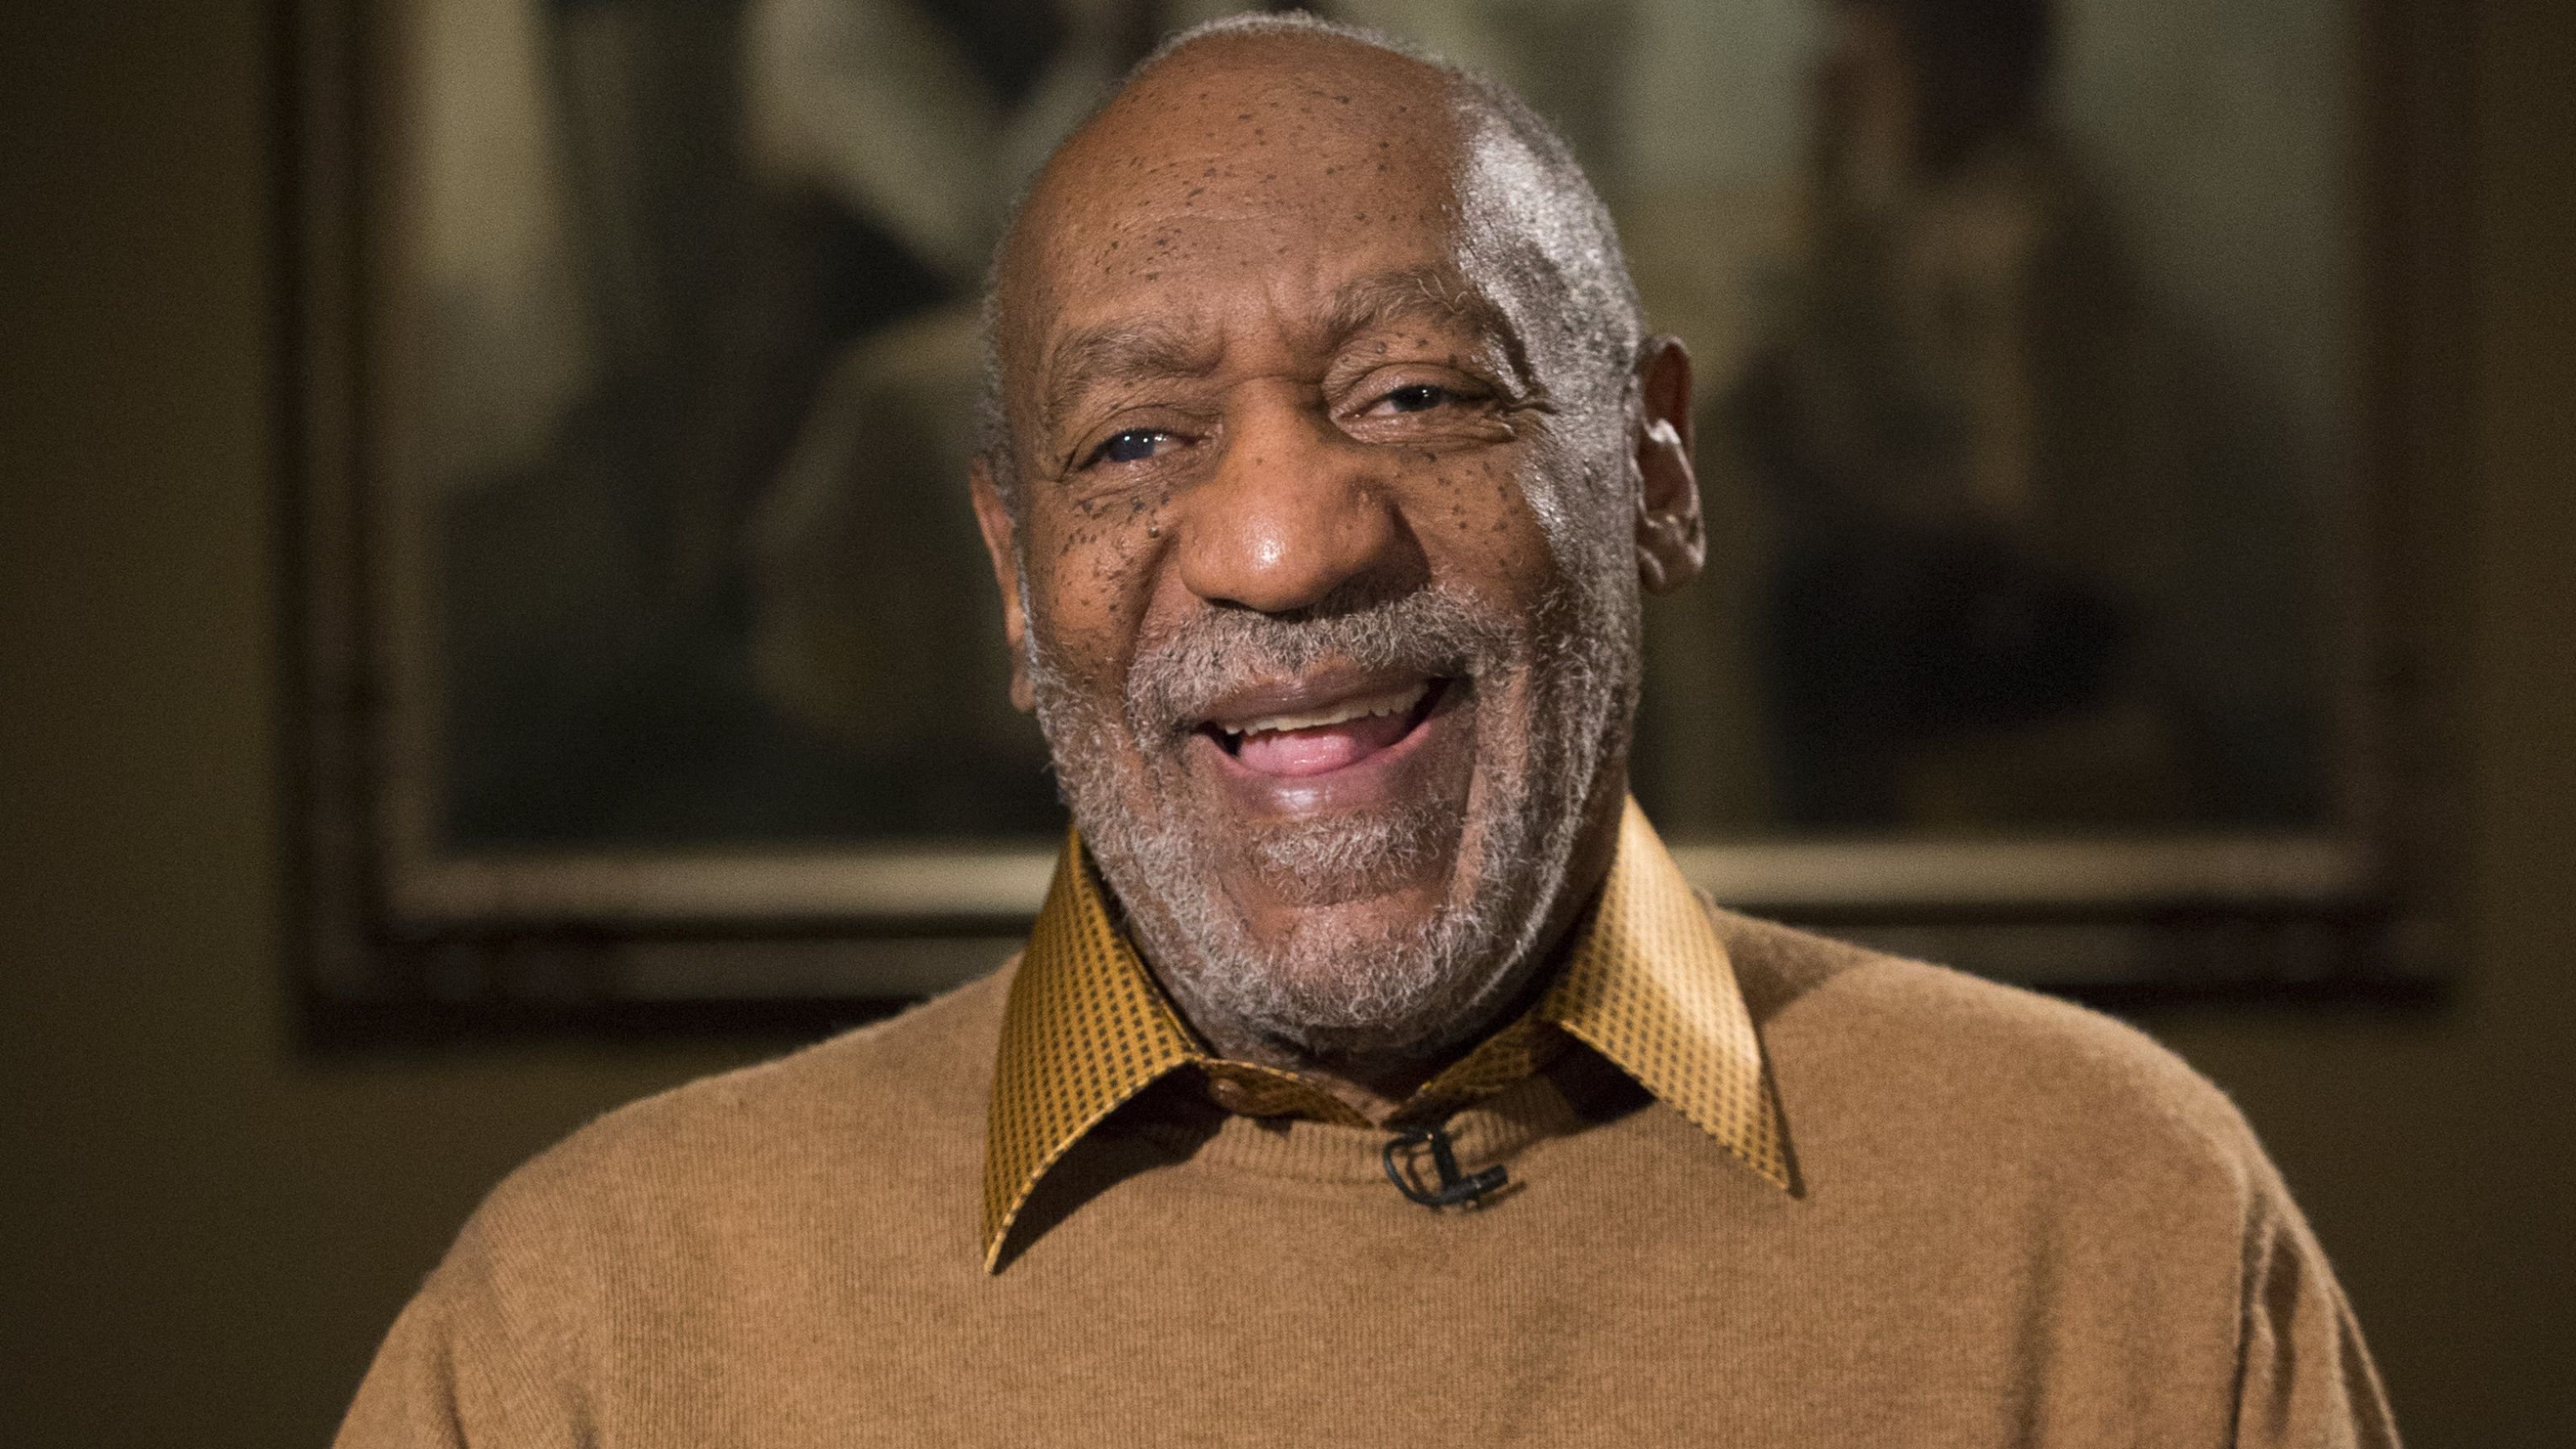 Social Media Lashes Out As Bill Cosby Performs First Stand-Up Gig After Sex Scandal